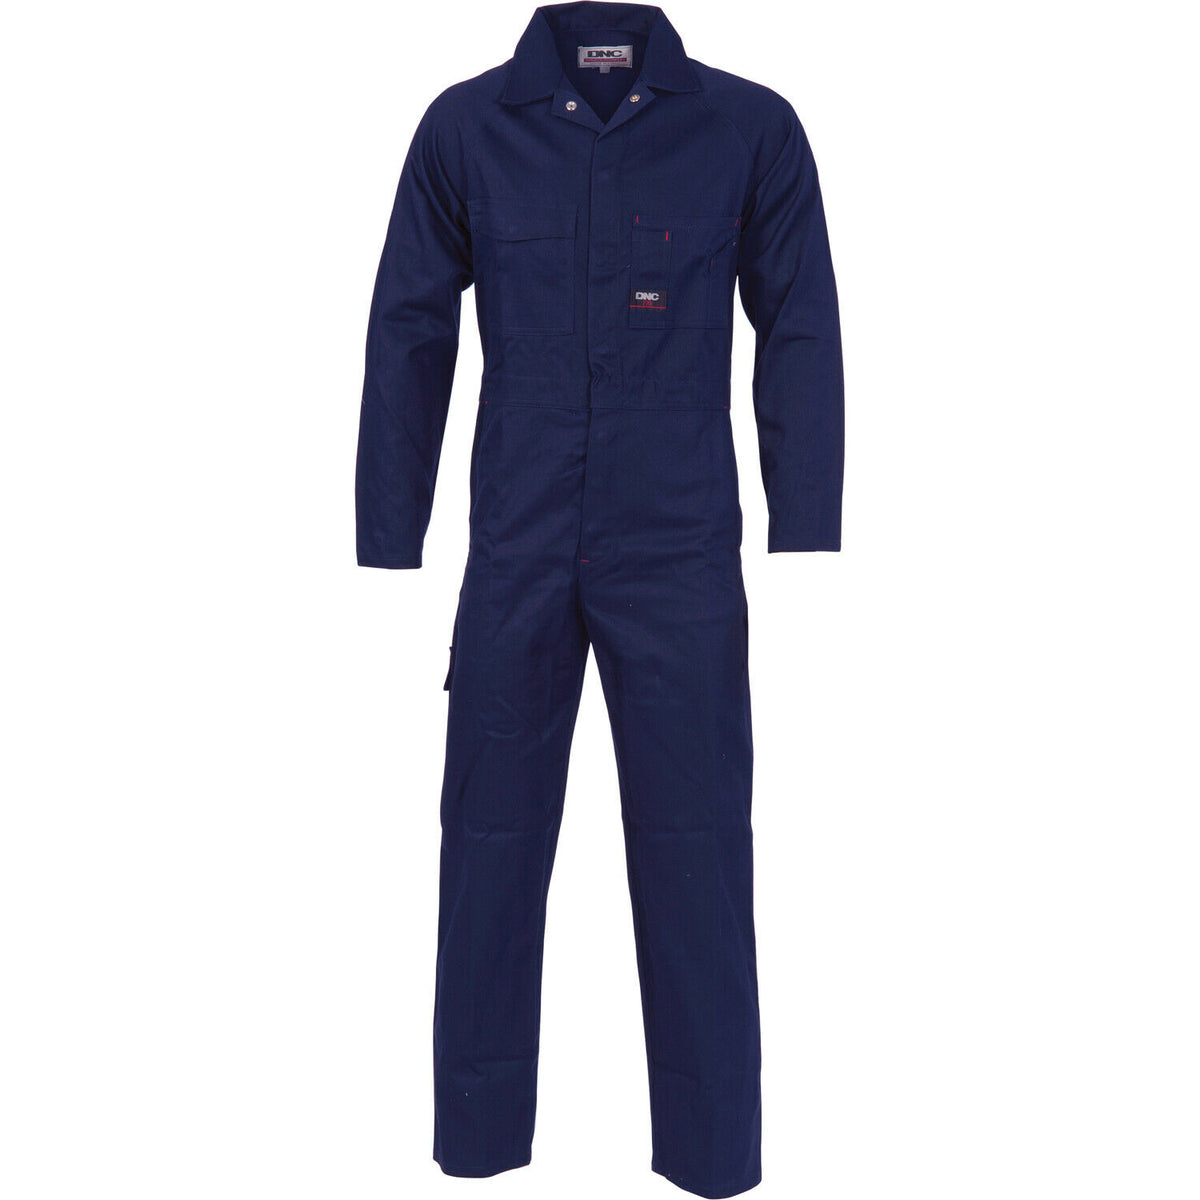 DNC Workwear Mens Cotton Drill Coverall Hi Vis Work Safety Sun Protection 3101-Collins Clothing Co